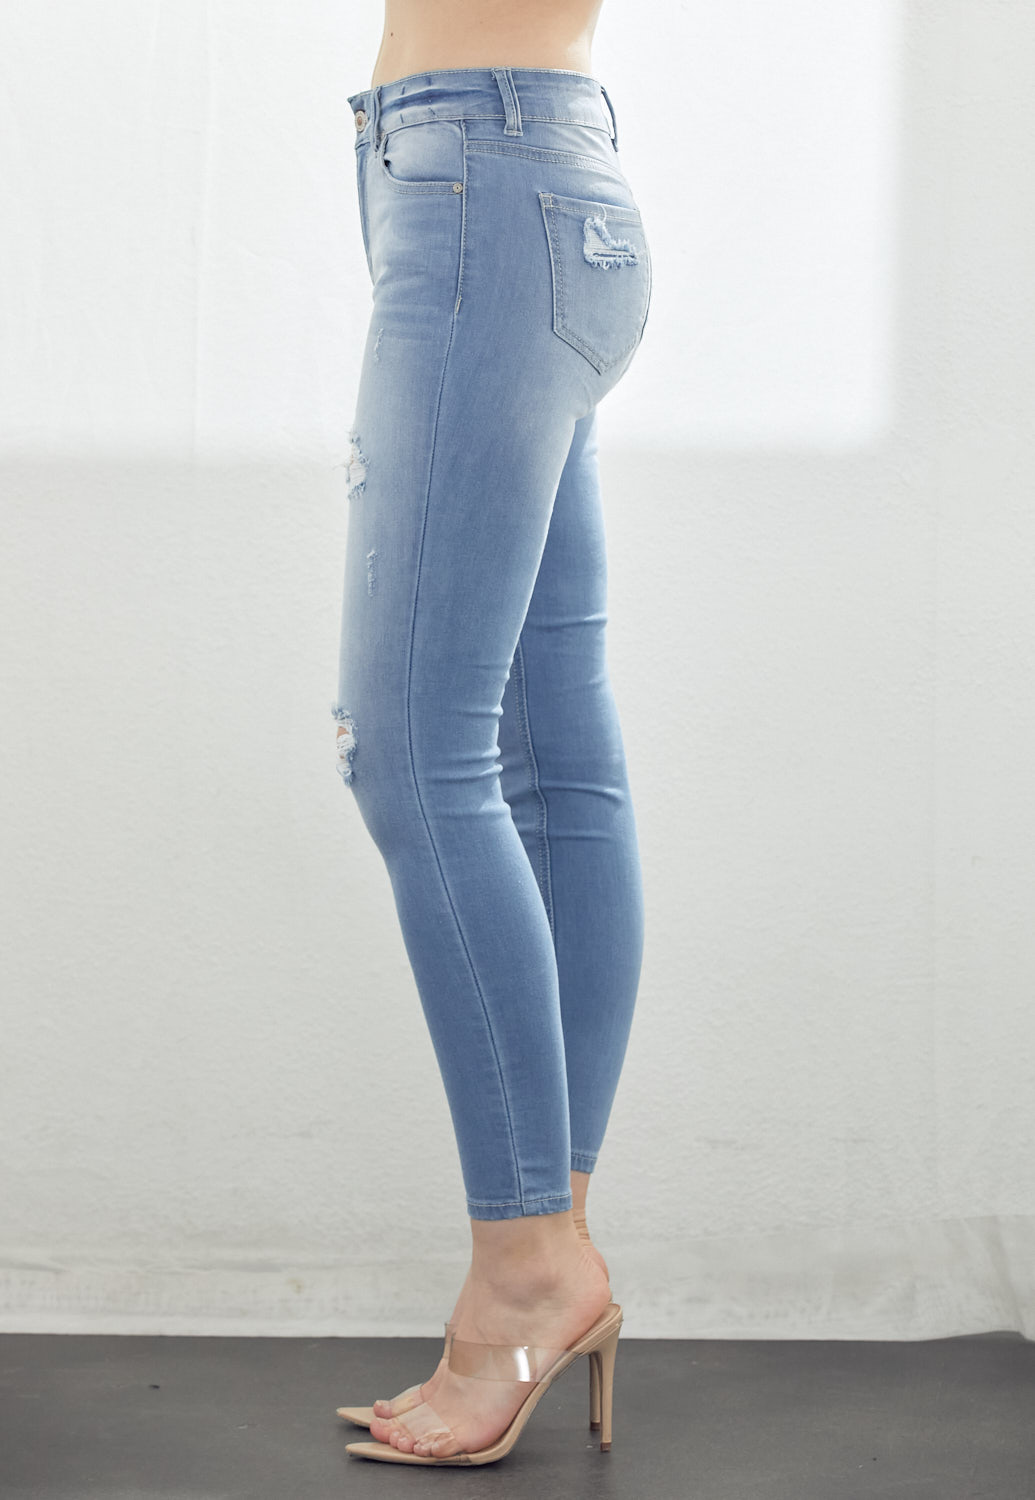 Distressed Washed Jeans